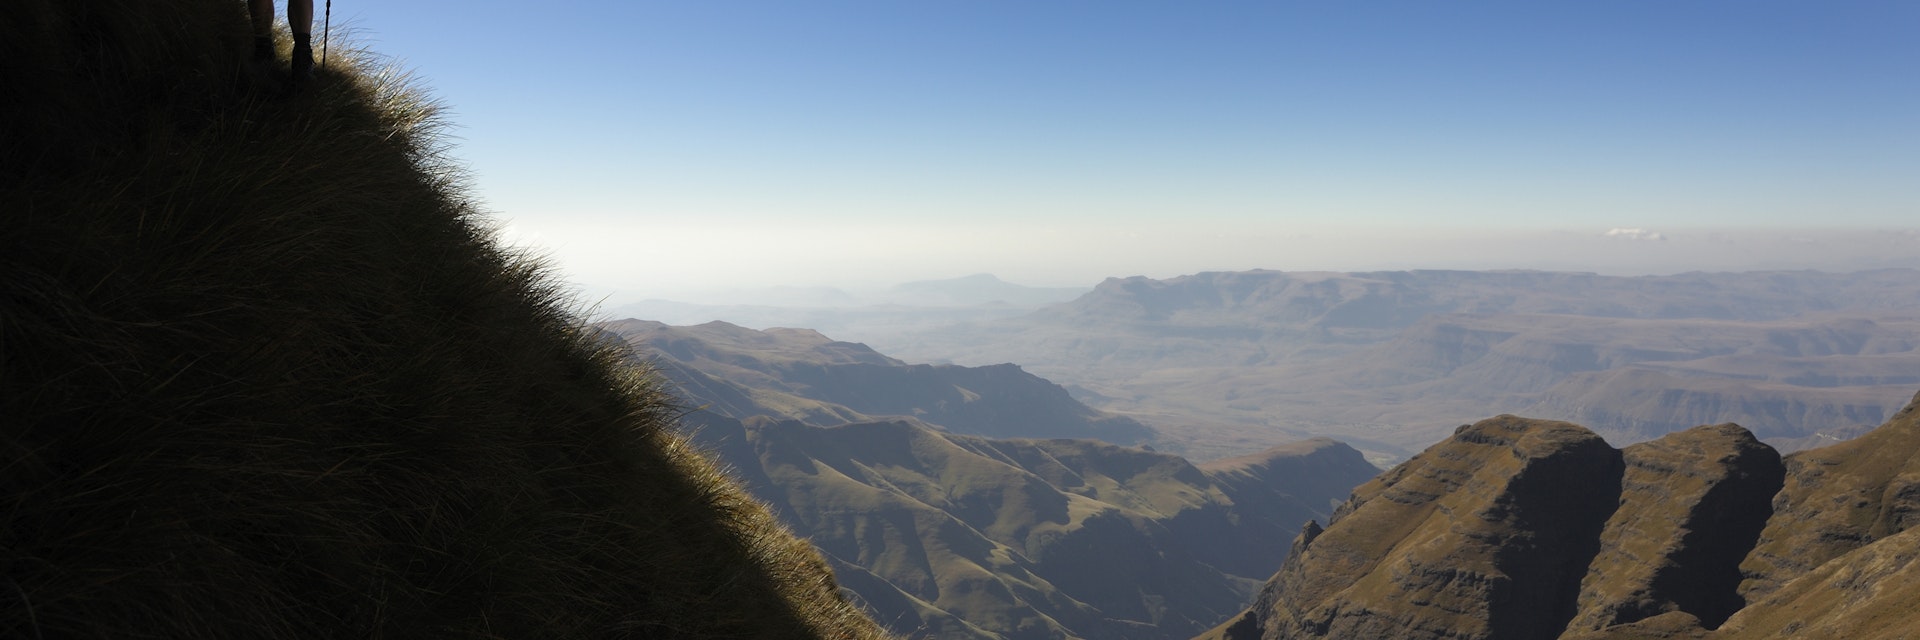 The Cathedral Peak Park, also known as the Mblambonja wilderness area, is part of the Drakensberg Ukhahlamba National Park, one of South Africa's World Heritage Sites and the largest mountain range in South Africa. Cathedral Peak itself is one of the highest of South Africa's Peaks and a popular sport climbing destination